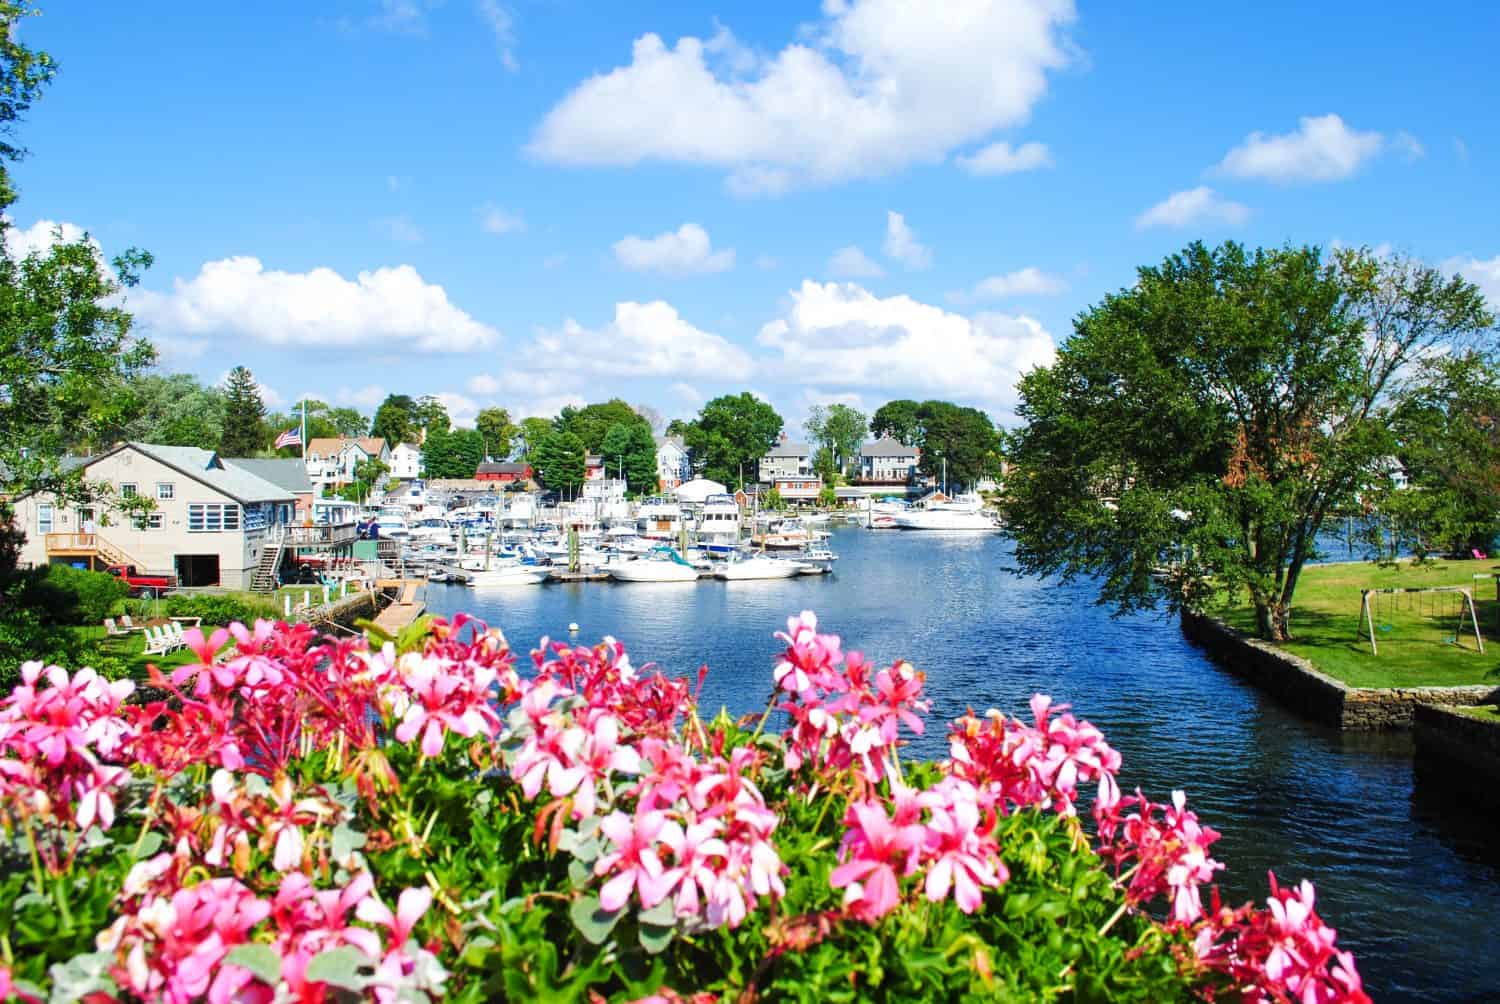 Picturesque view of a small town in Rhode Island.